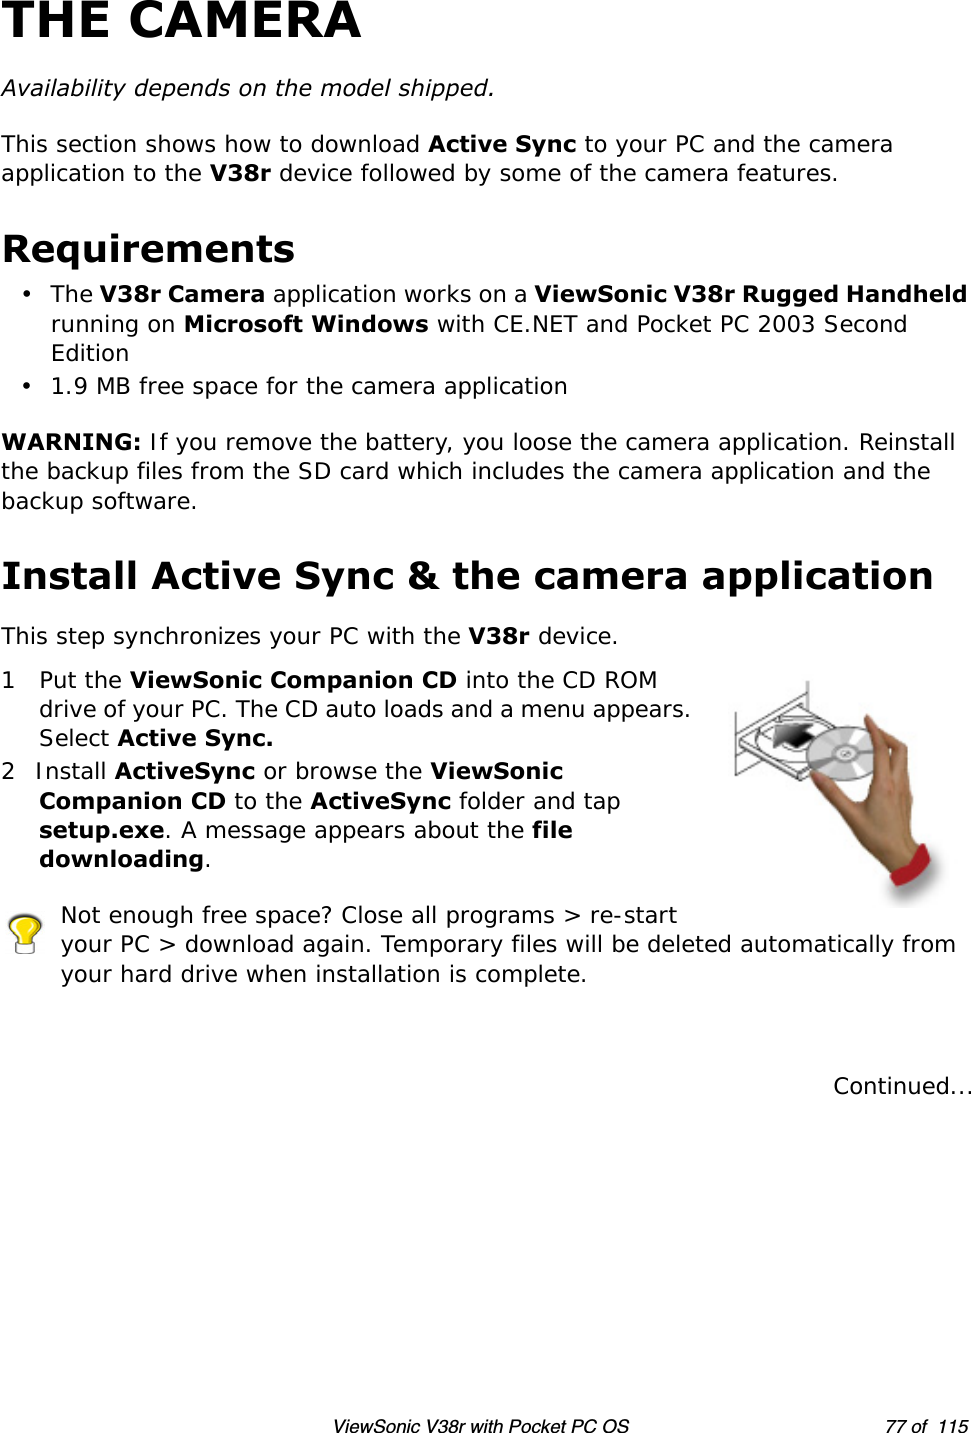 ViewSonic V38r with Pocket PC OS 77 of  115THE CAMERAAvailability depends on the model shipped. This section shows how to download Active Sync to your PC and the camera application to the V38r device followed by some of the camera features.Requirements•The V38r Camera application works on a ViewSonic V38r Rugged Handheld running on Microsoft Windows with CE.NET and Pocket PC 2003 Second Edition• 1.9 MB free space for the camera applicationWARNING: If you remove the battery, you loose the camera application. Reinstall the backup files from the SD card which includes the camera application and the backup software. Install Active Sync &amp; the camera applicationThis step synchronizes your PC with the V38r device. 1Put the ViewSonic Companion CD into the CD ROM drive of your PC. The CD auto loads and a menu appears. Select Active Sync.2Install ActiveSync or browse the ViewSonic Companion CD to the ActiveSync folder and tap setup.exe. A message appears about the file downloading.Not enough free space? Close all programs &gt; re-start your PC &gt; download again. Temporary files will be deleted automatically from your hard drive when installation is complete.Continued...